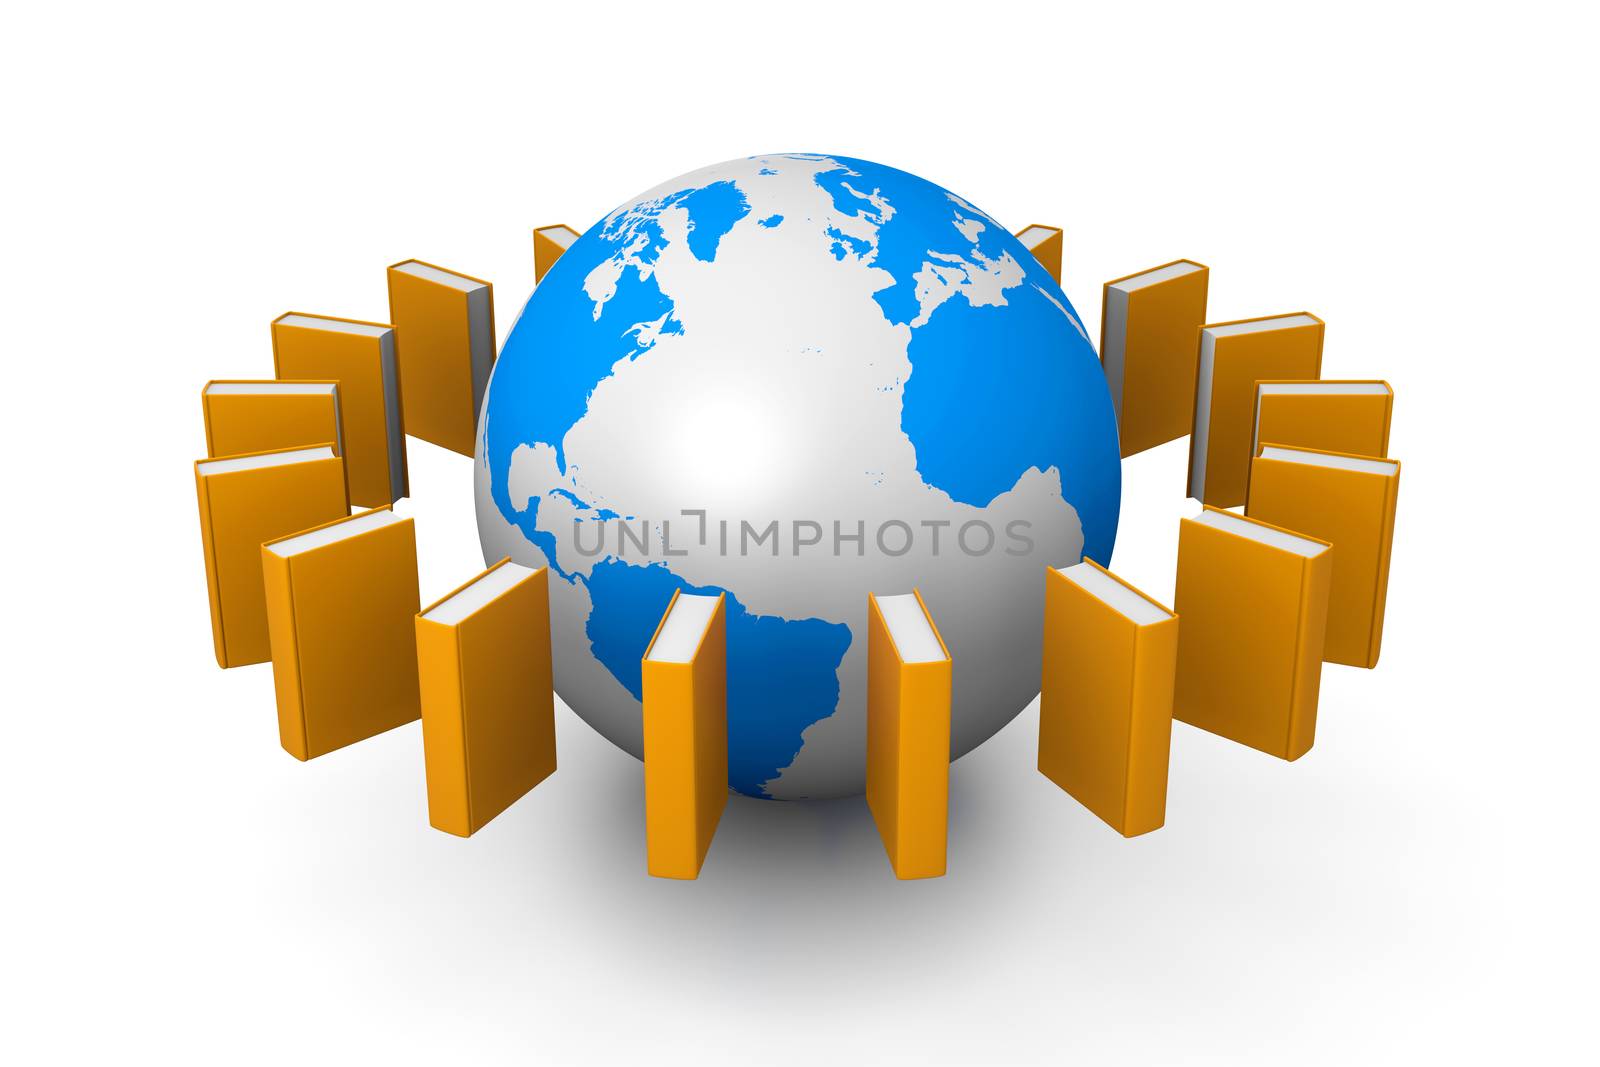 Books Flying Around the Earth 3D Illustration on White Background